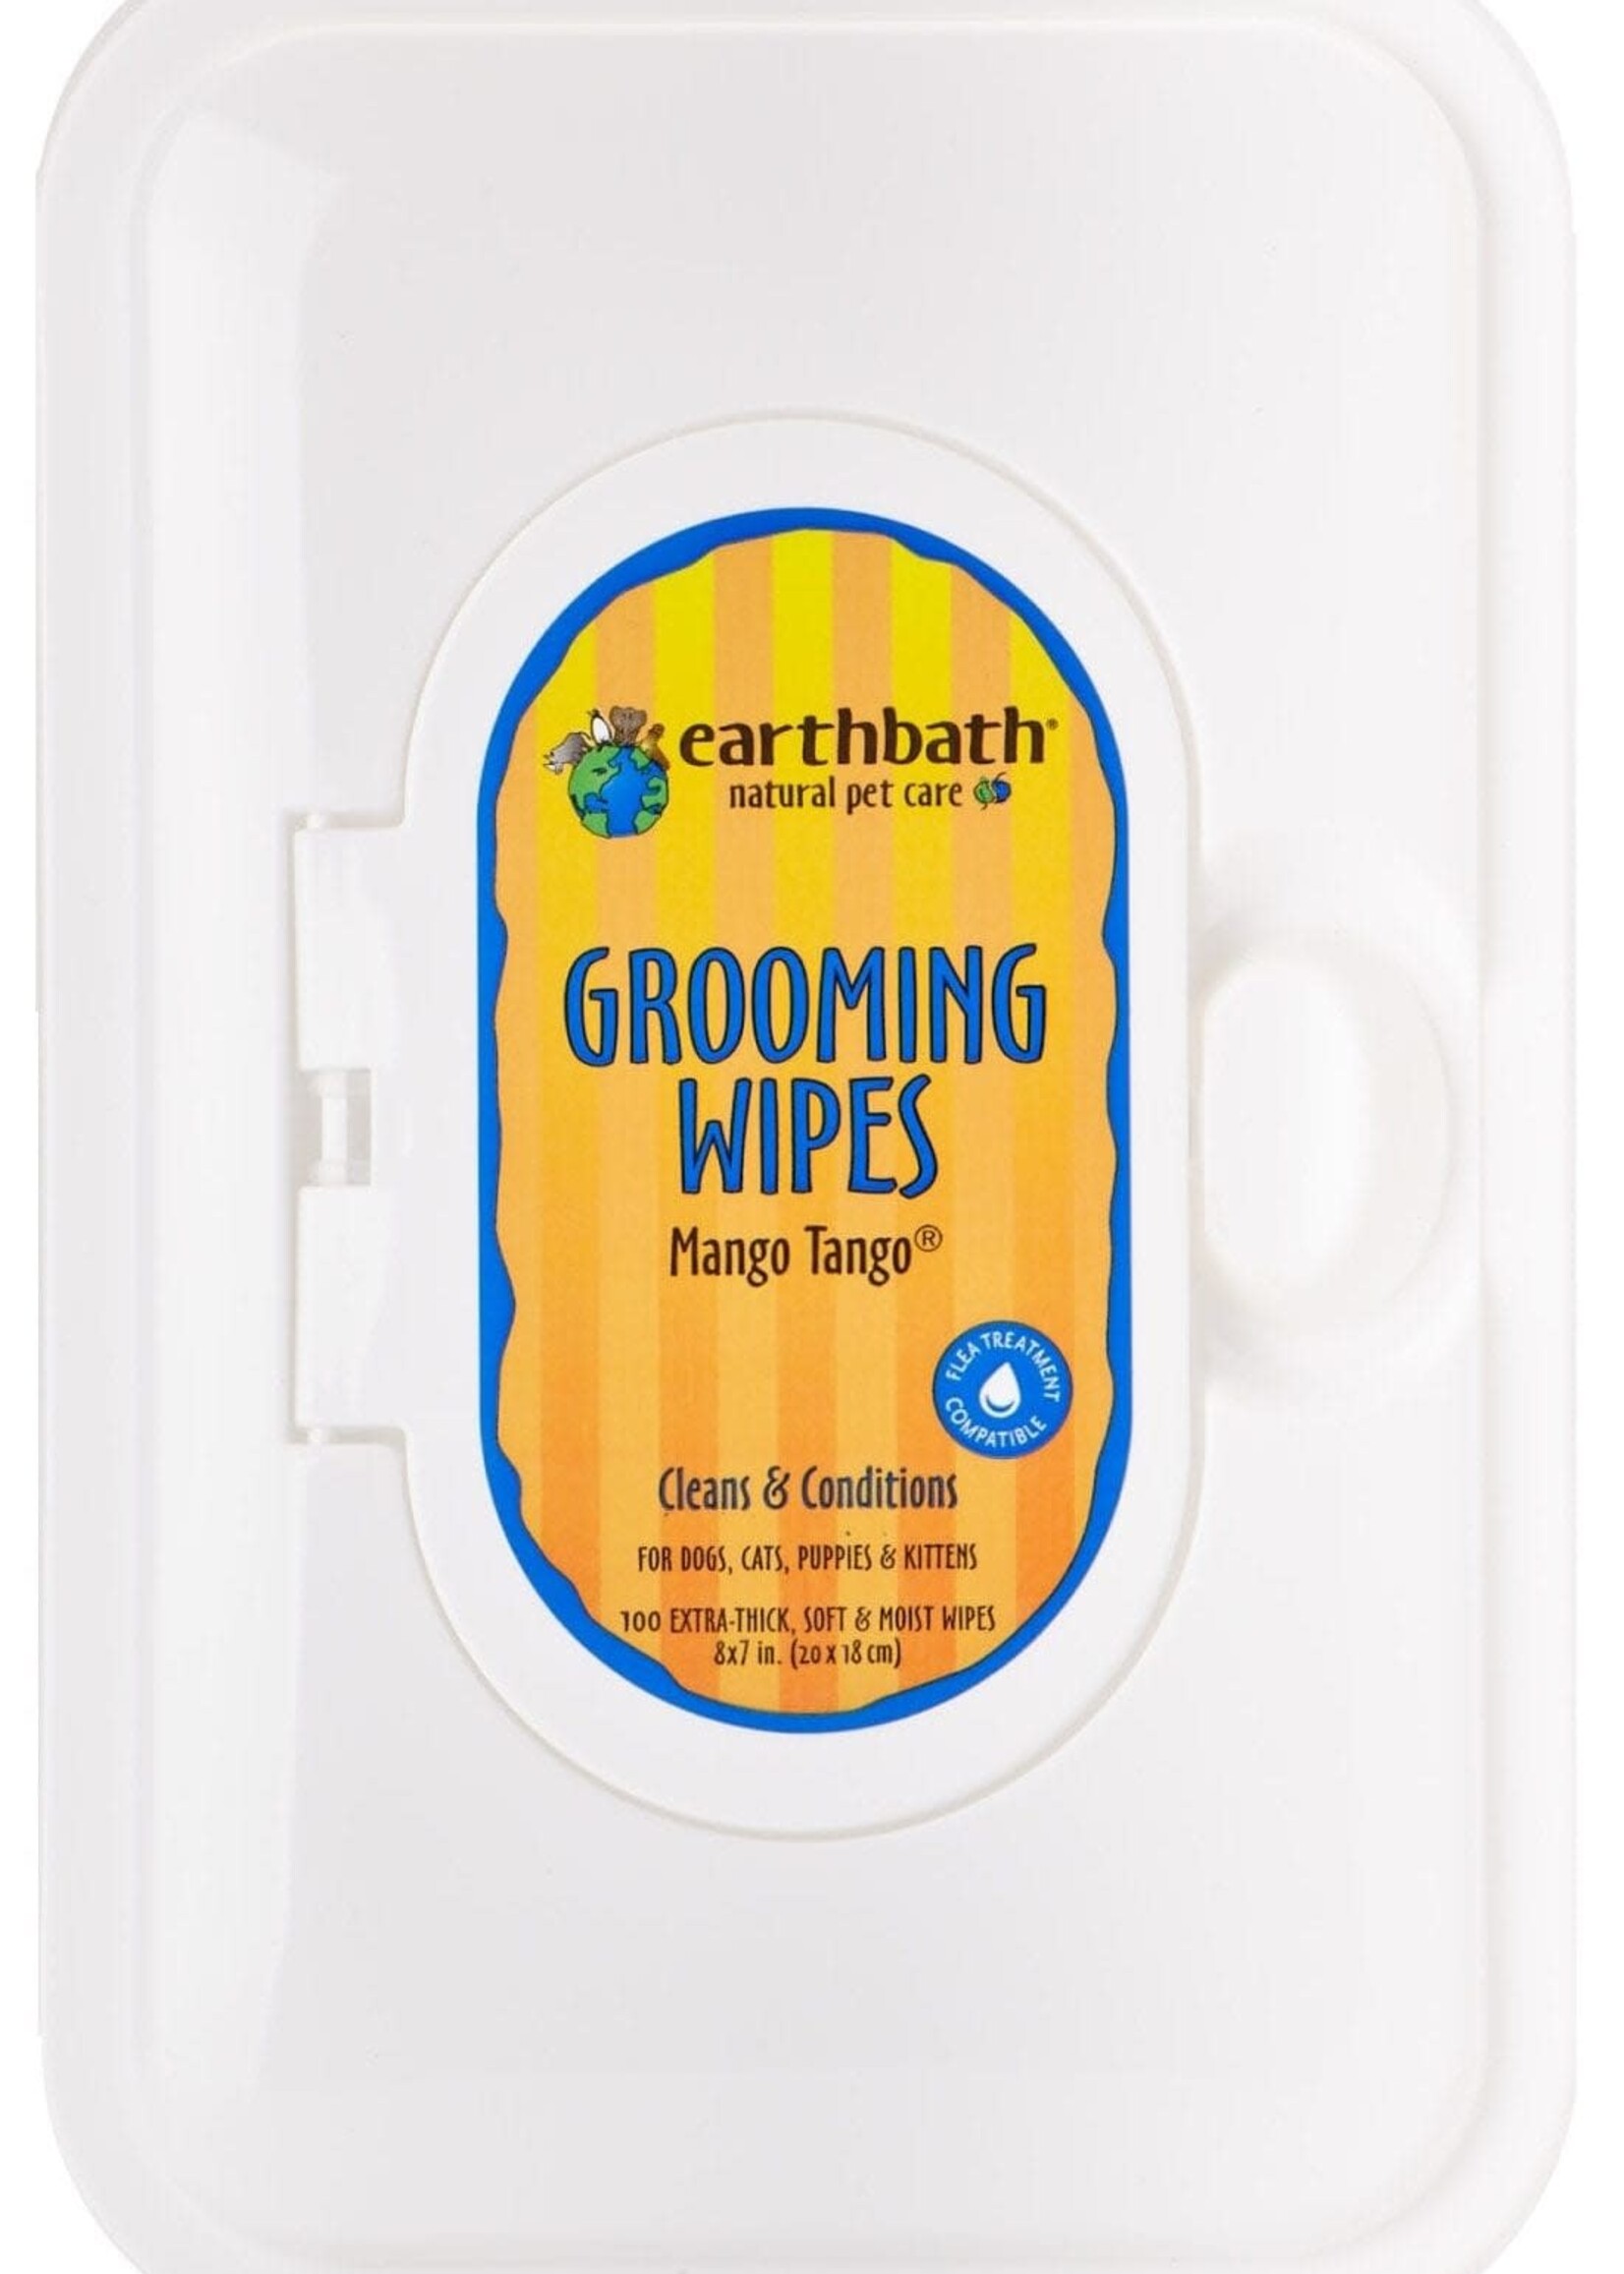 Earthbath Earthbath Grooming Wipes Mango Tango for Dogs & Cats (100 Count)